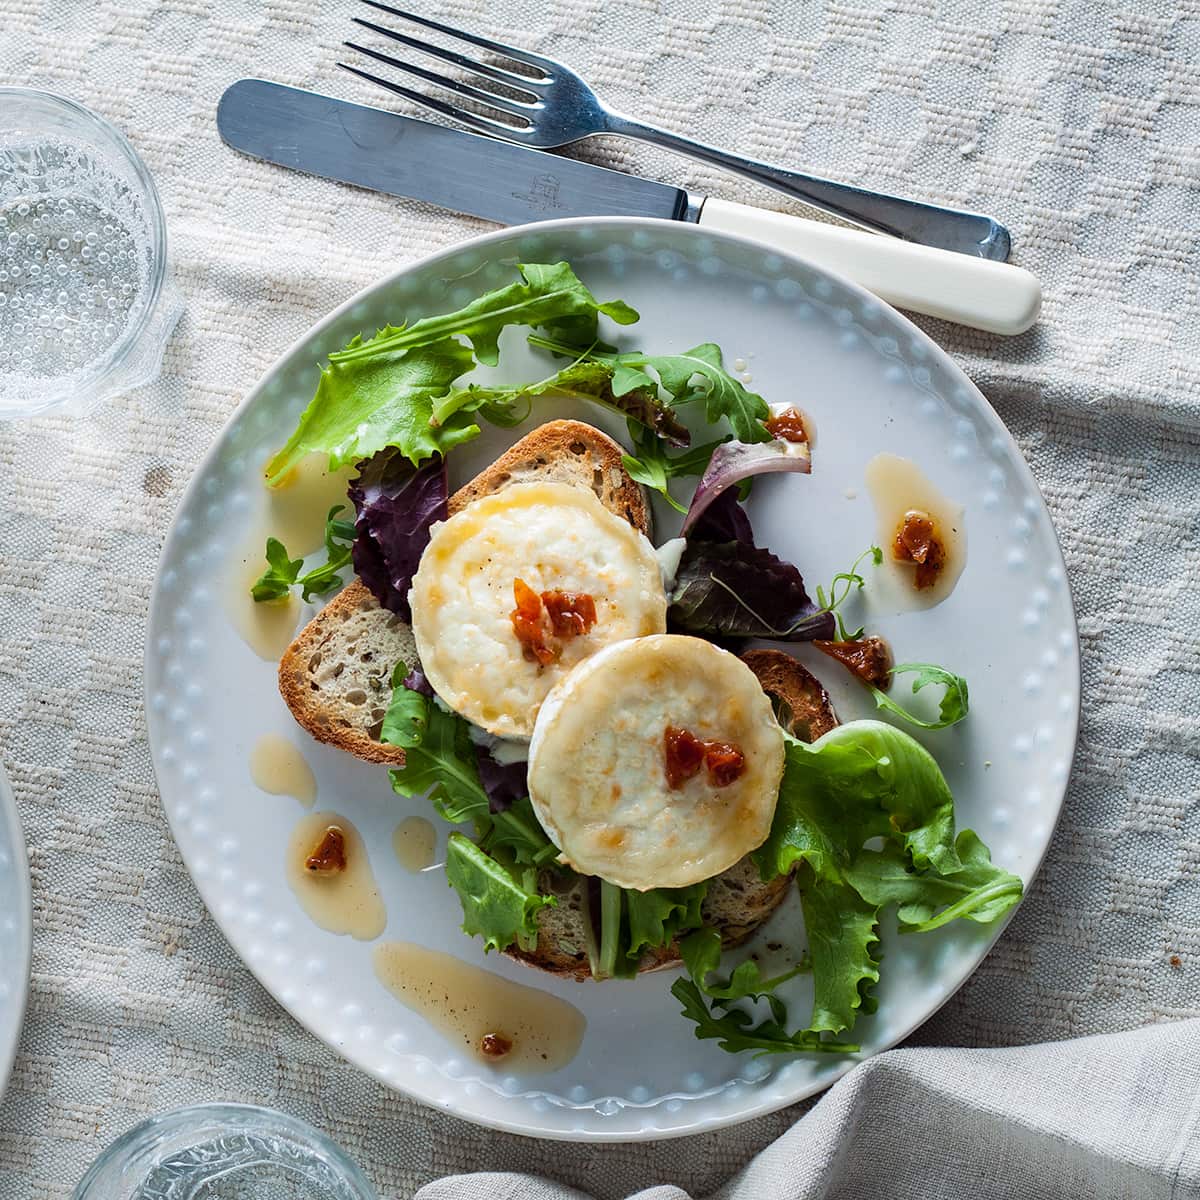 goats cheese salad with sundried tomato dressing.